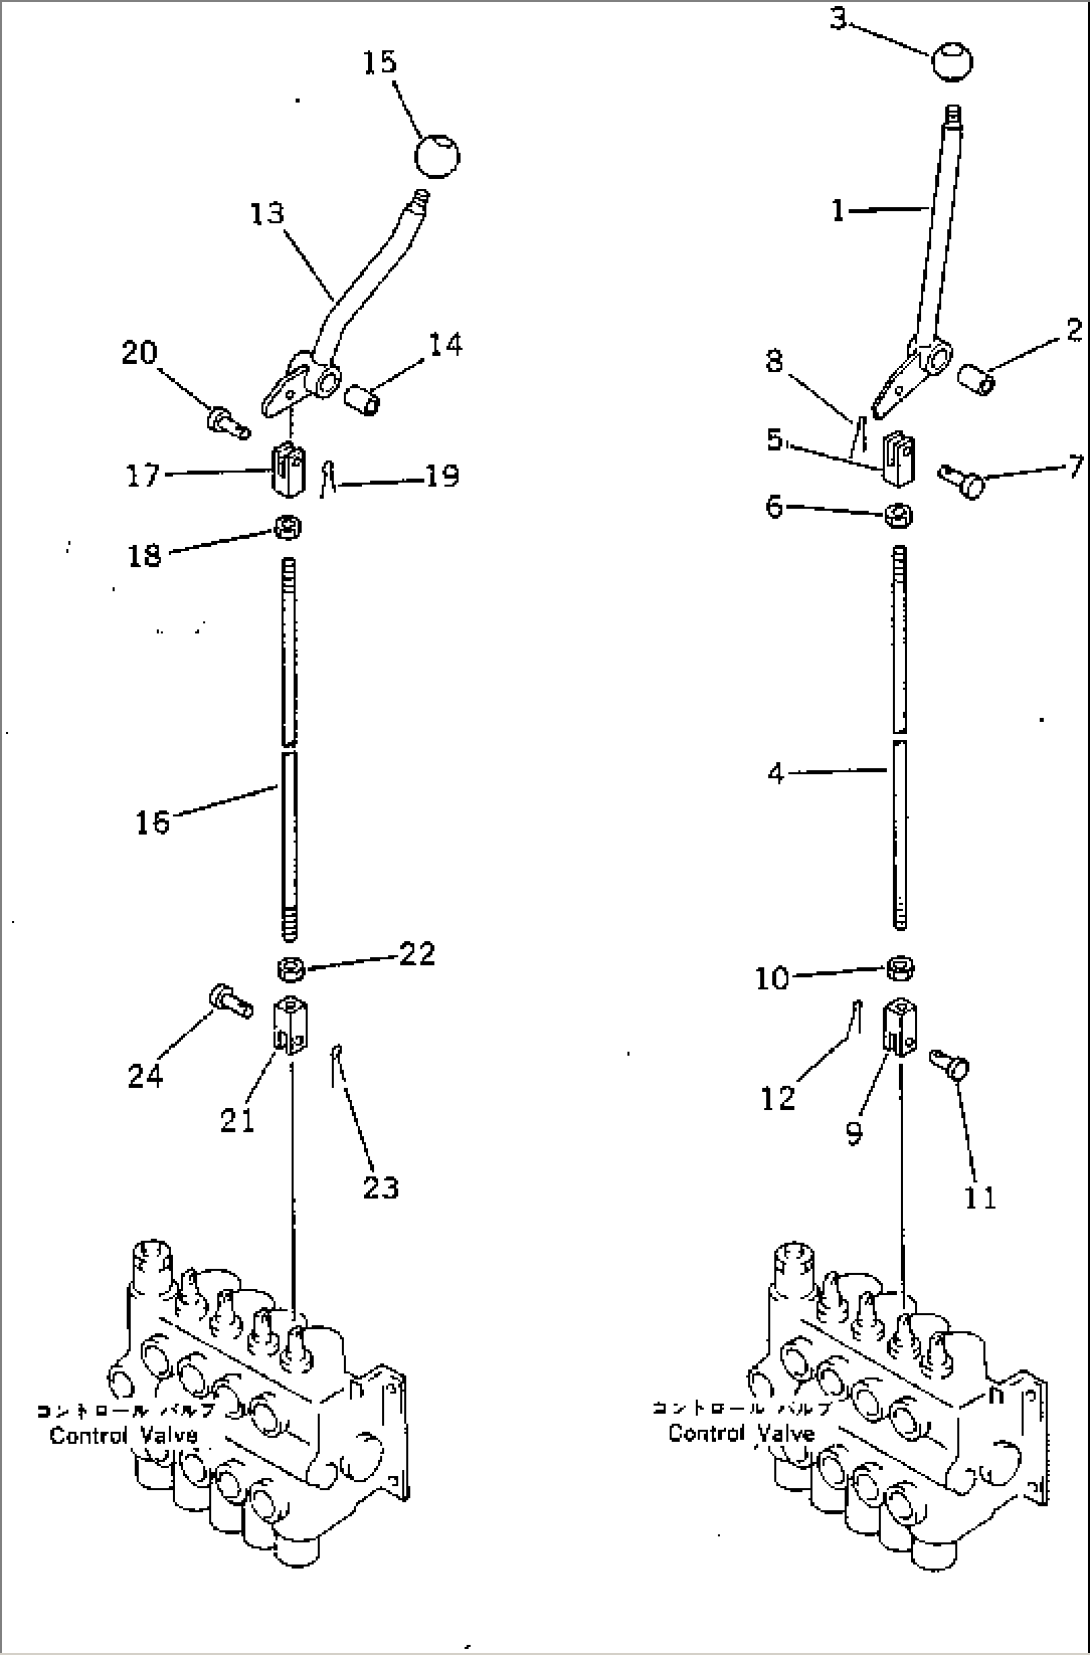 HYDRAULIC CONTROL LEVER (FOR ANGLING SNOW PLOW)